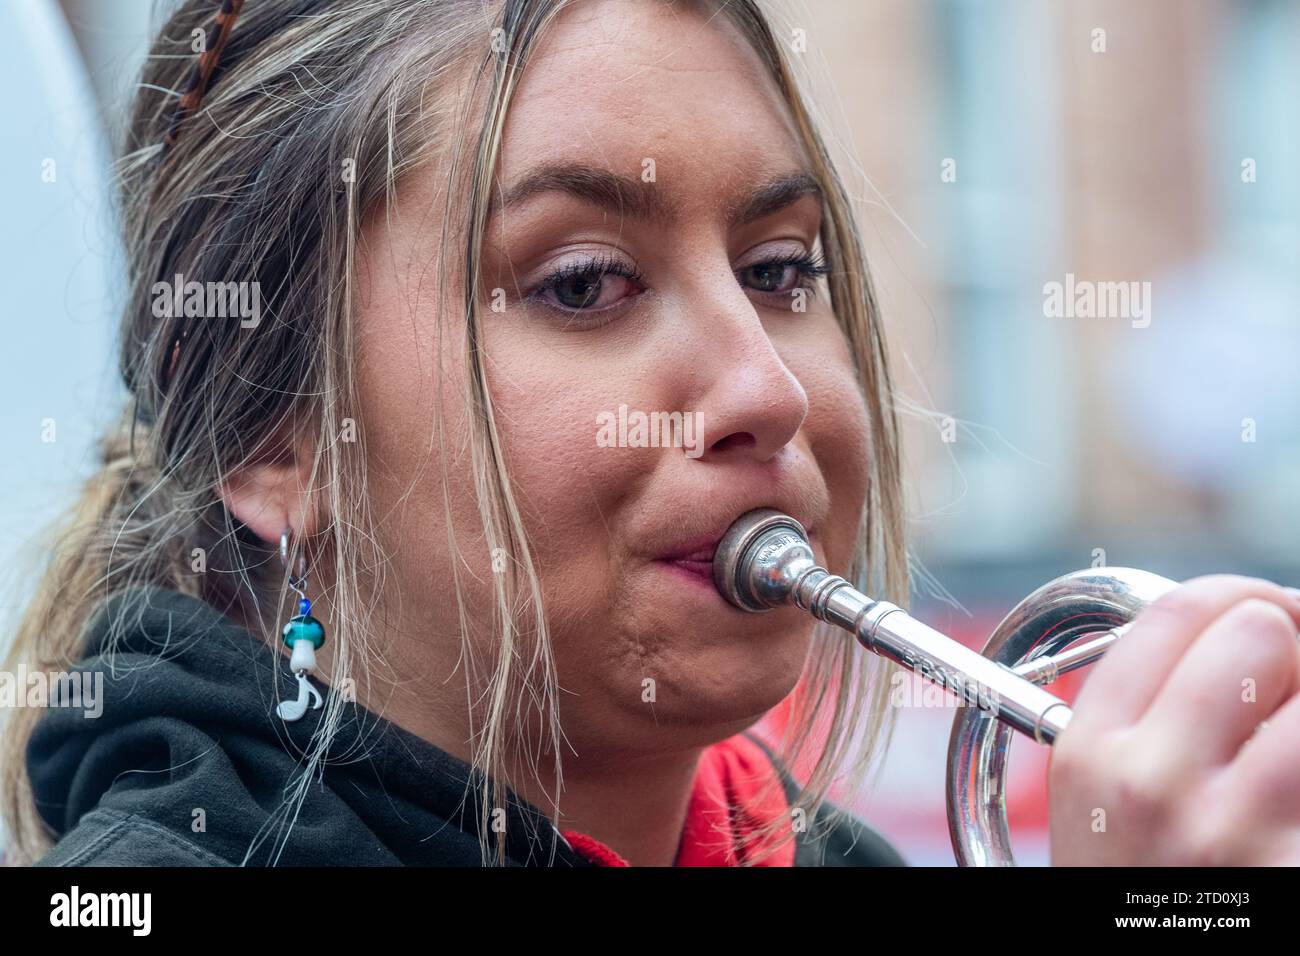 Girl playing trumpet into microphone - Stock Image - F005/1164